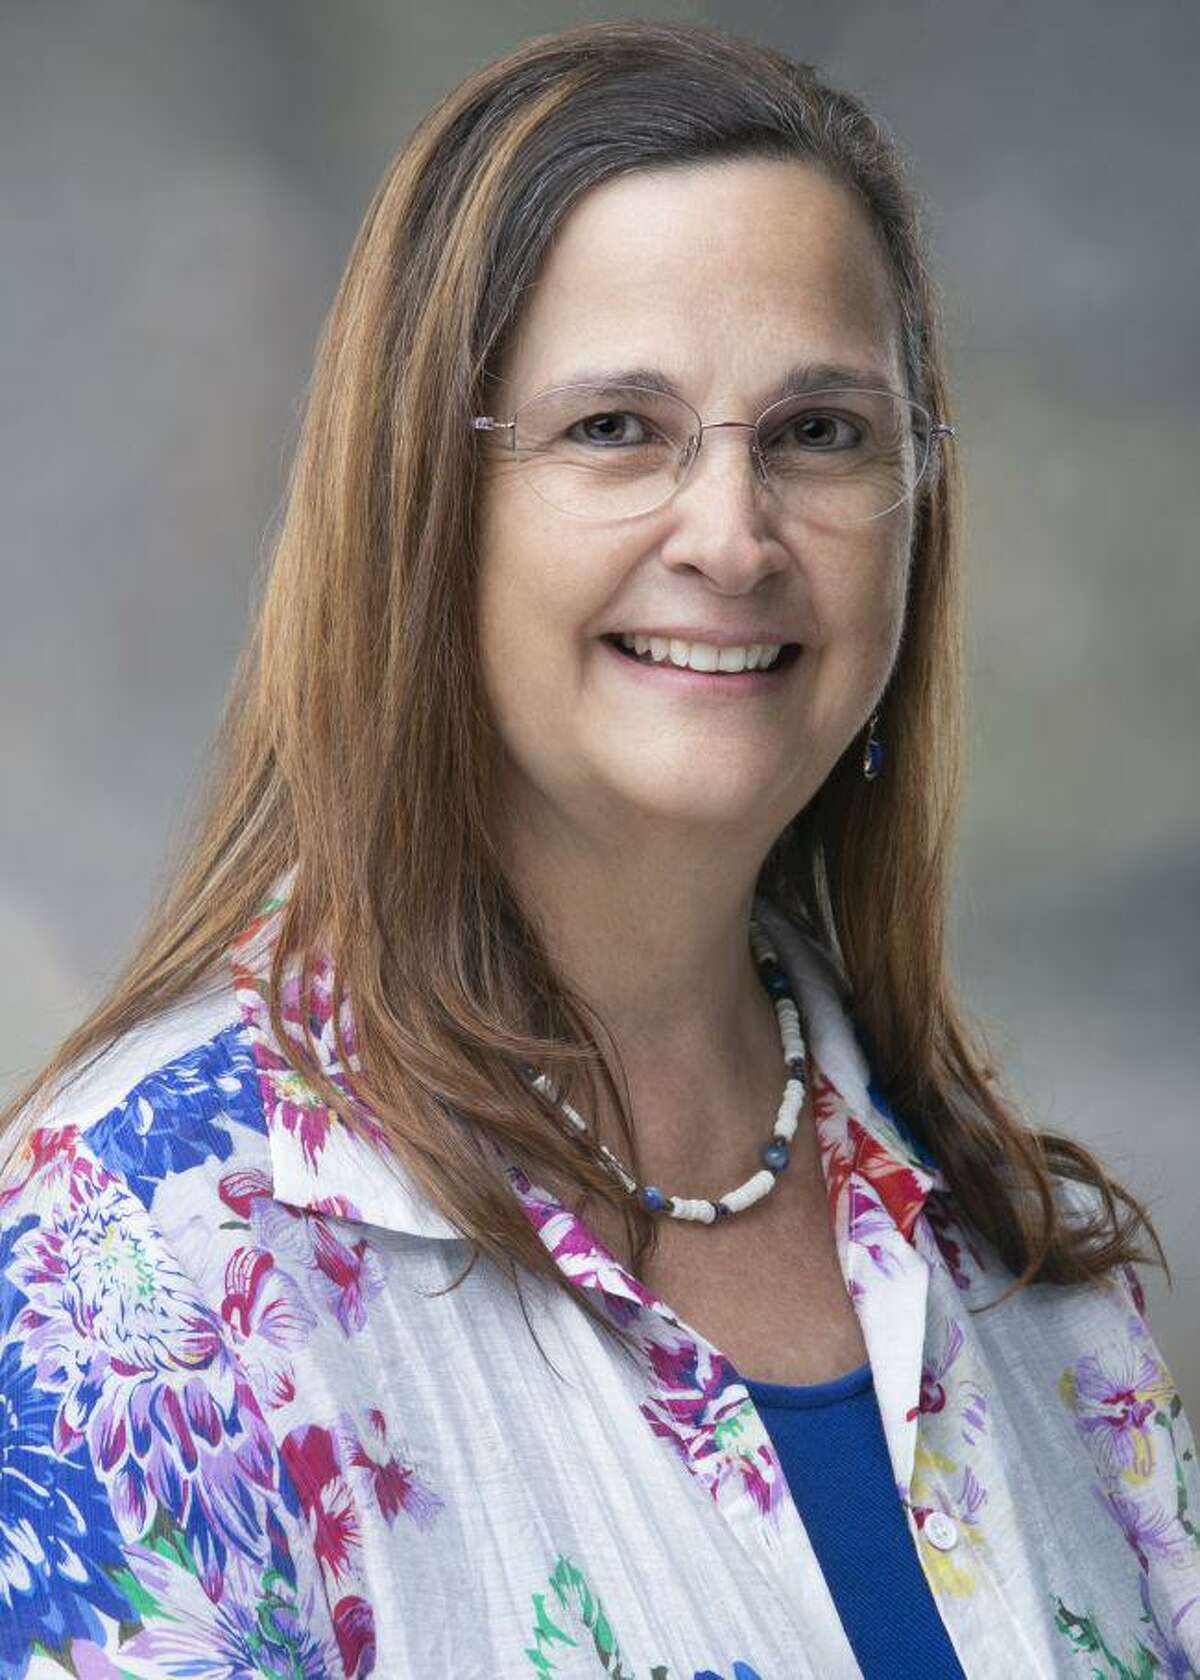 Dr. Annette Occhialini, known to her students as Dr. O, is an associate professor at UT Health San Antonio.